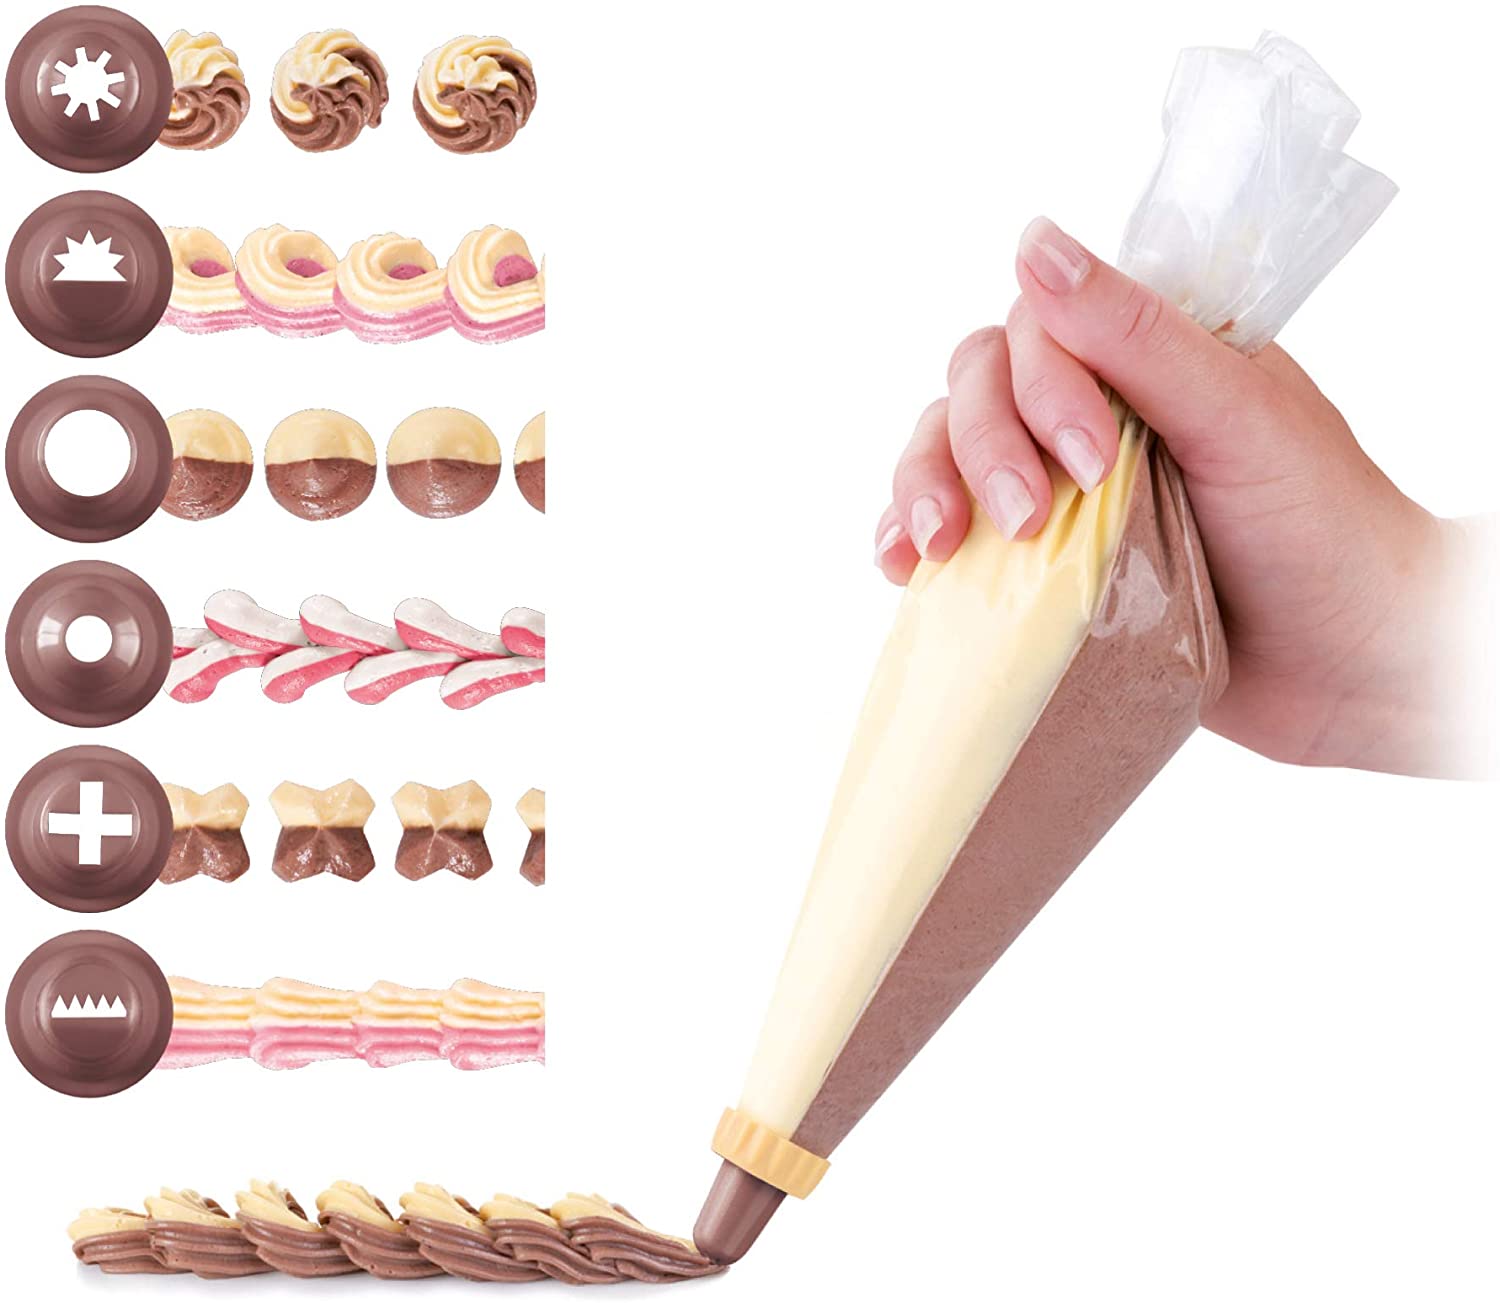 Tescoma Delicia 630479 Double Piping Bag 30 CM, Pack of 10, 6 Nozzles